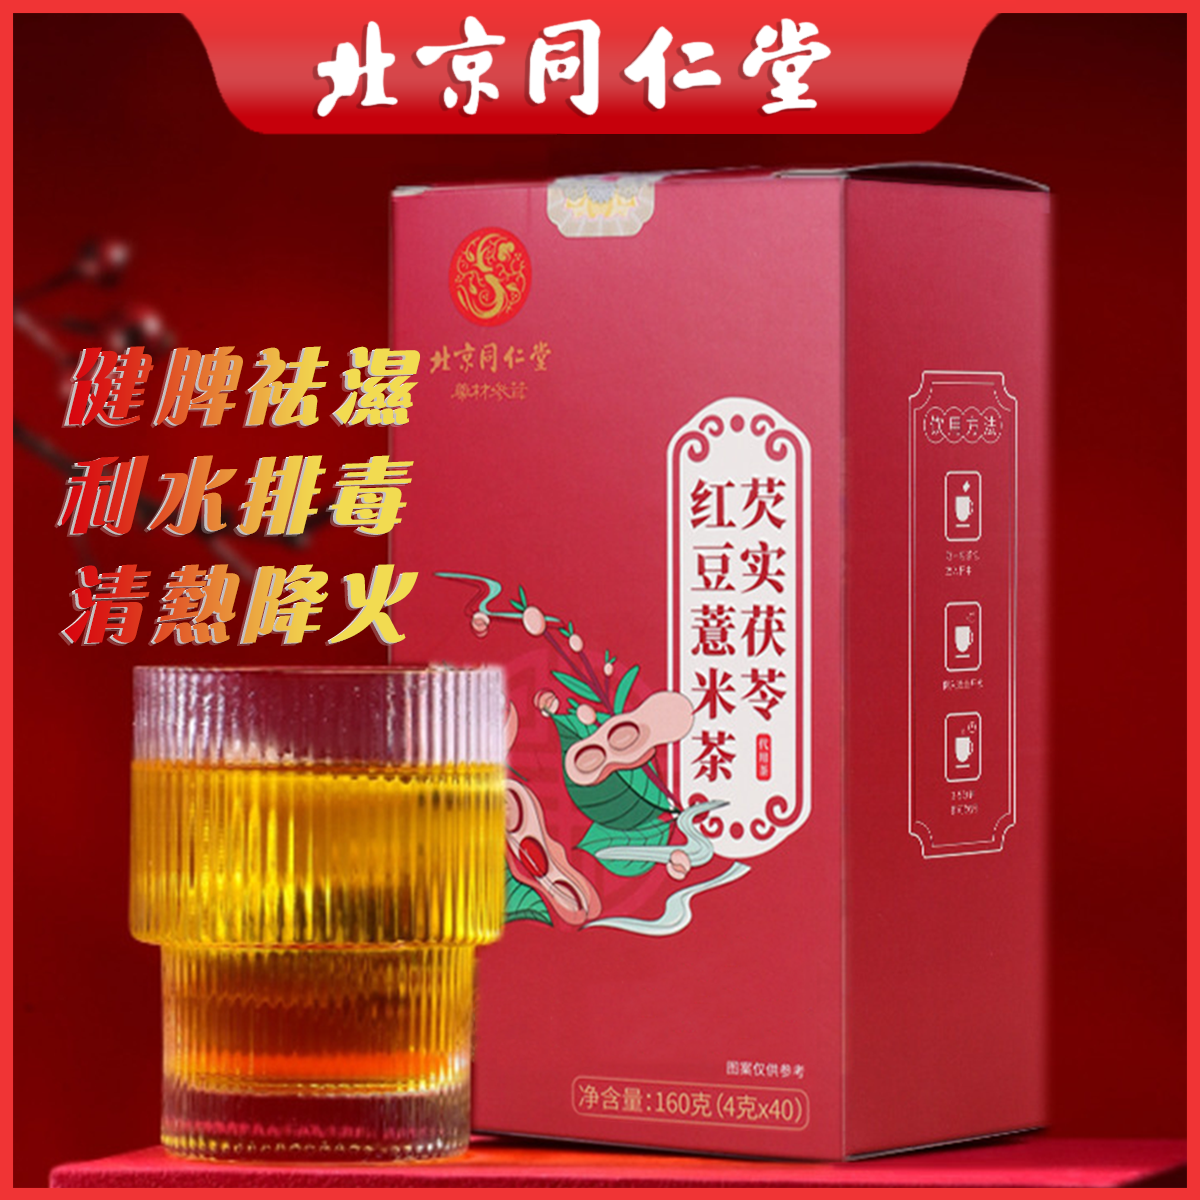 Gorgon Poria, Red Bean and Barley Tea (40 sachets) Health substitute tea, upgraded new package｜ 590235